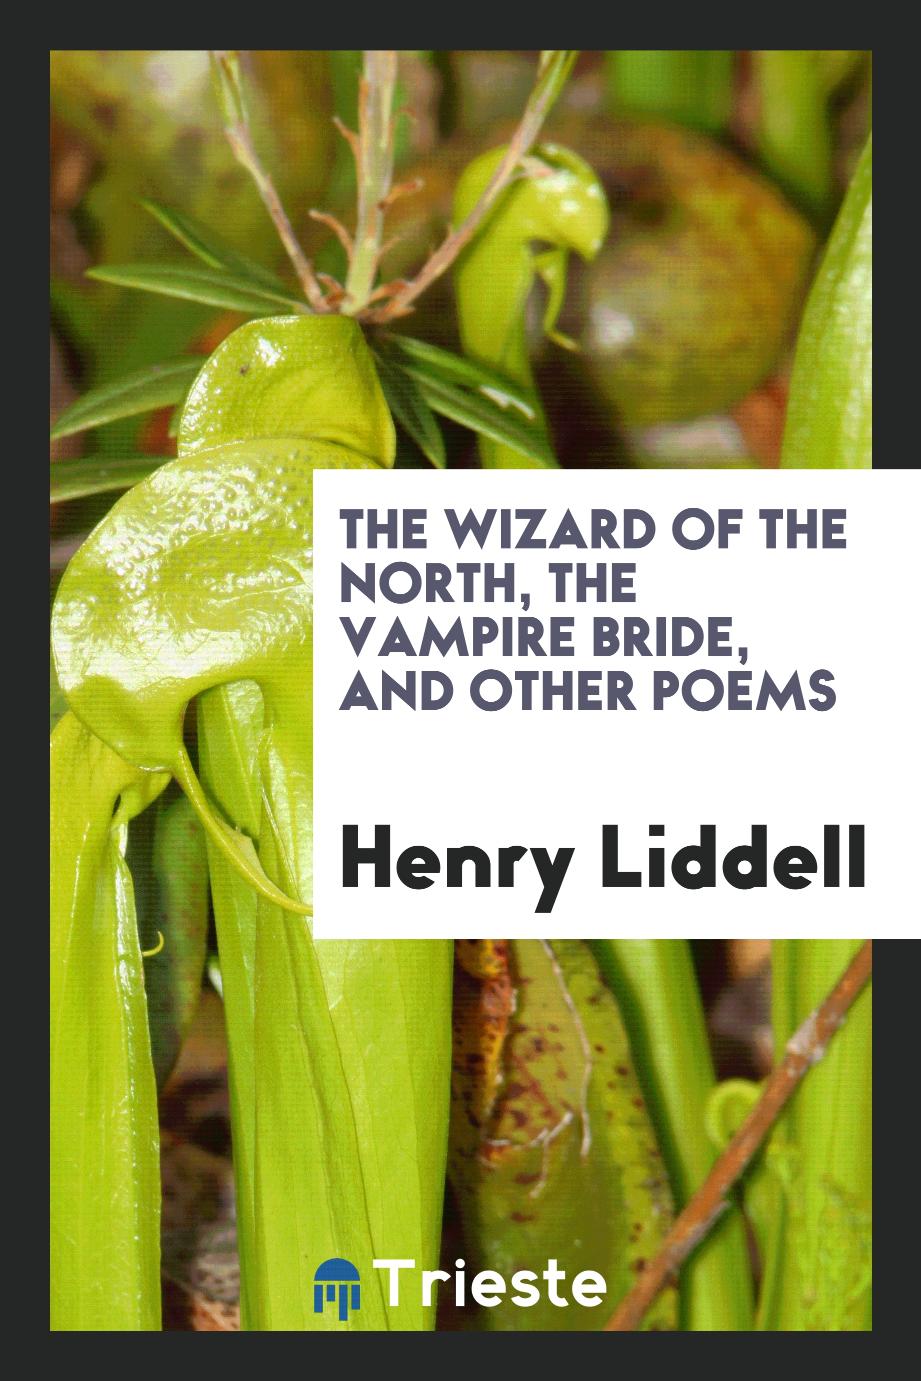 The Wizard of the North, The Vampire Bride, and Other Poems